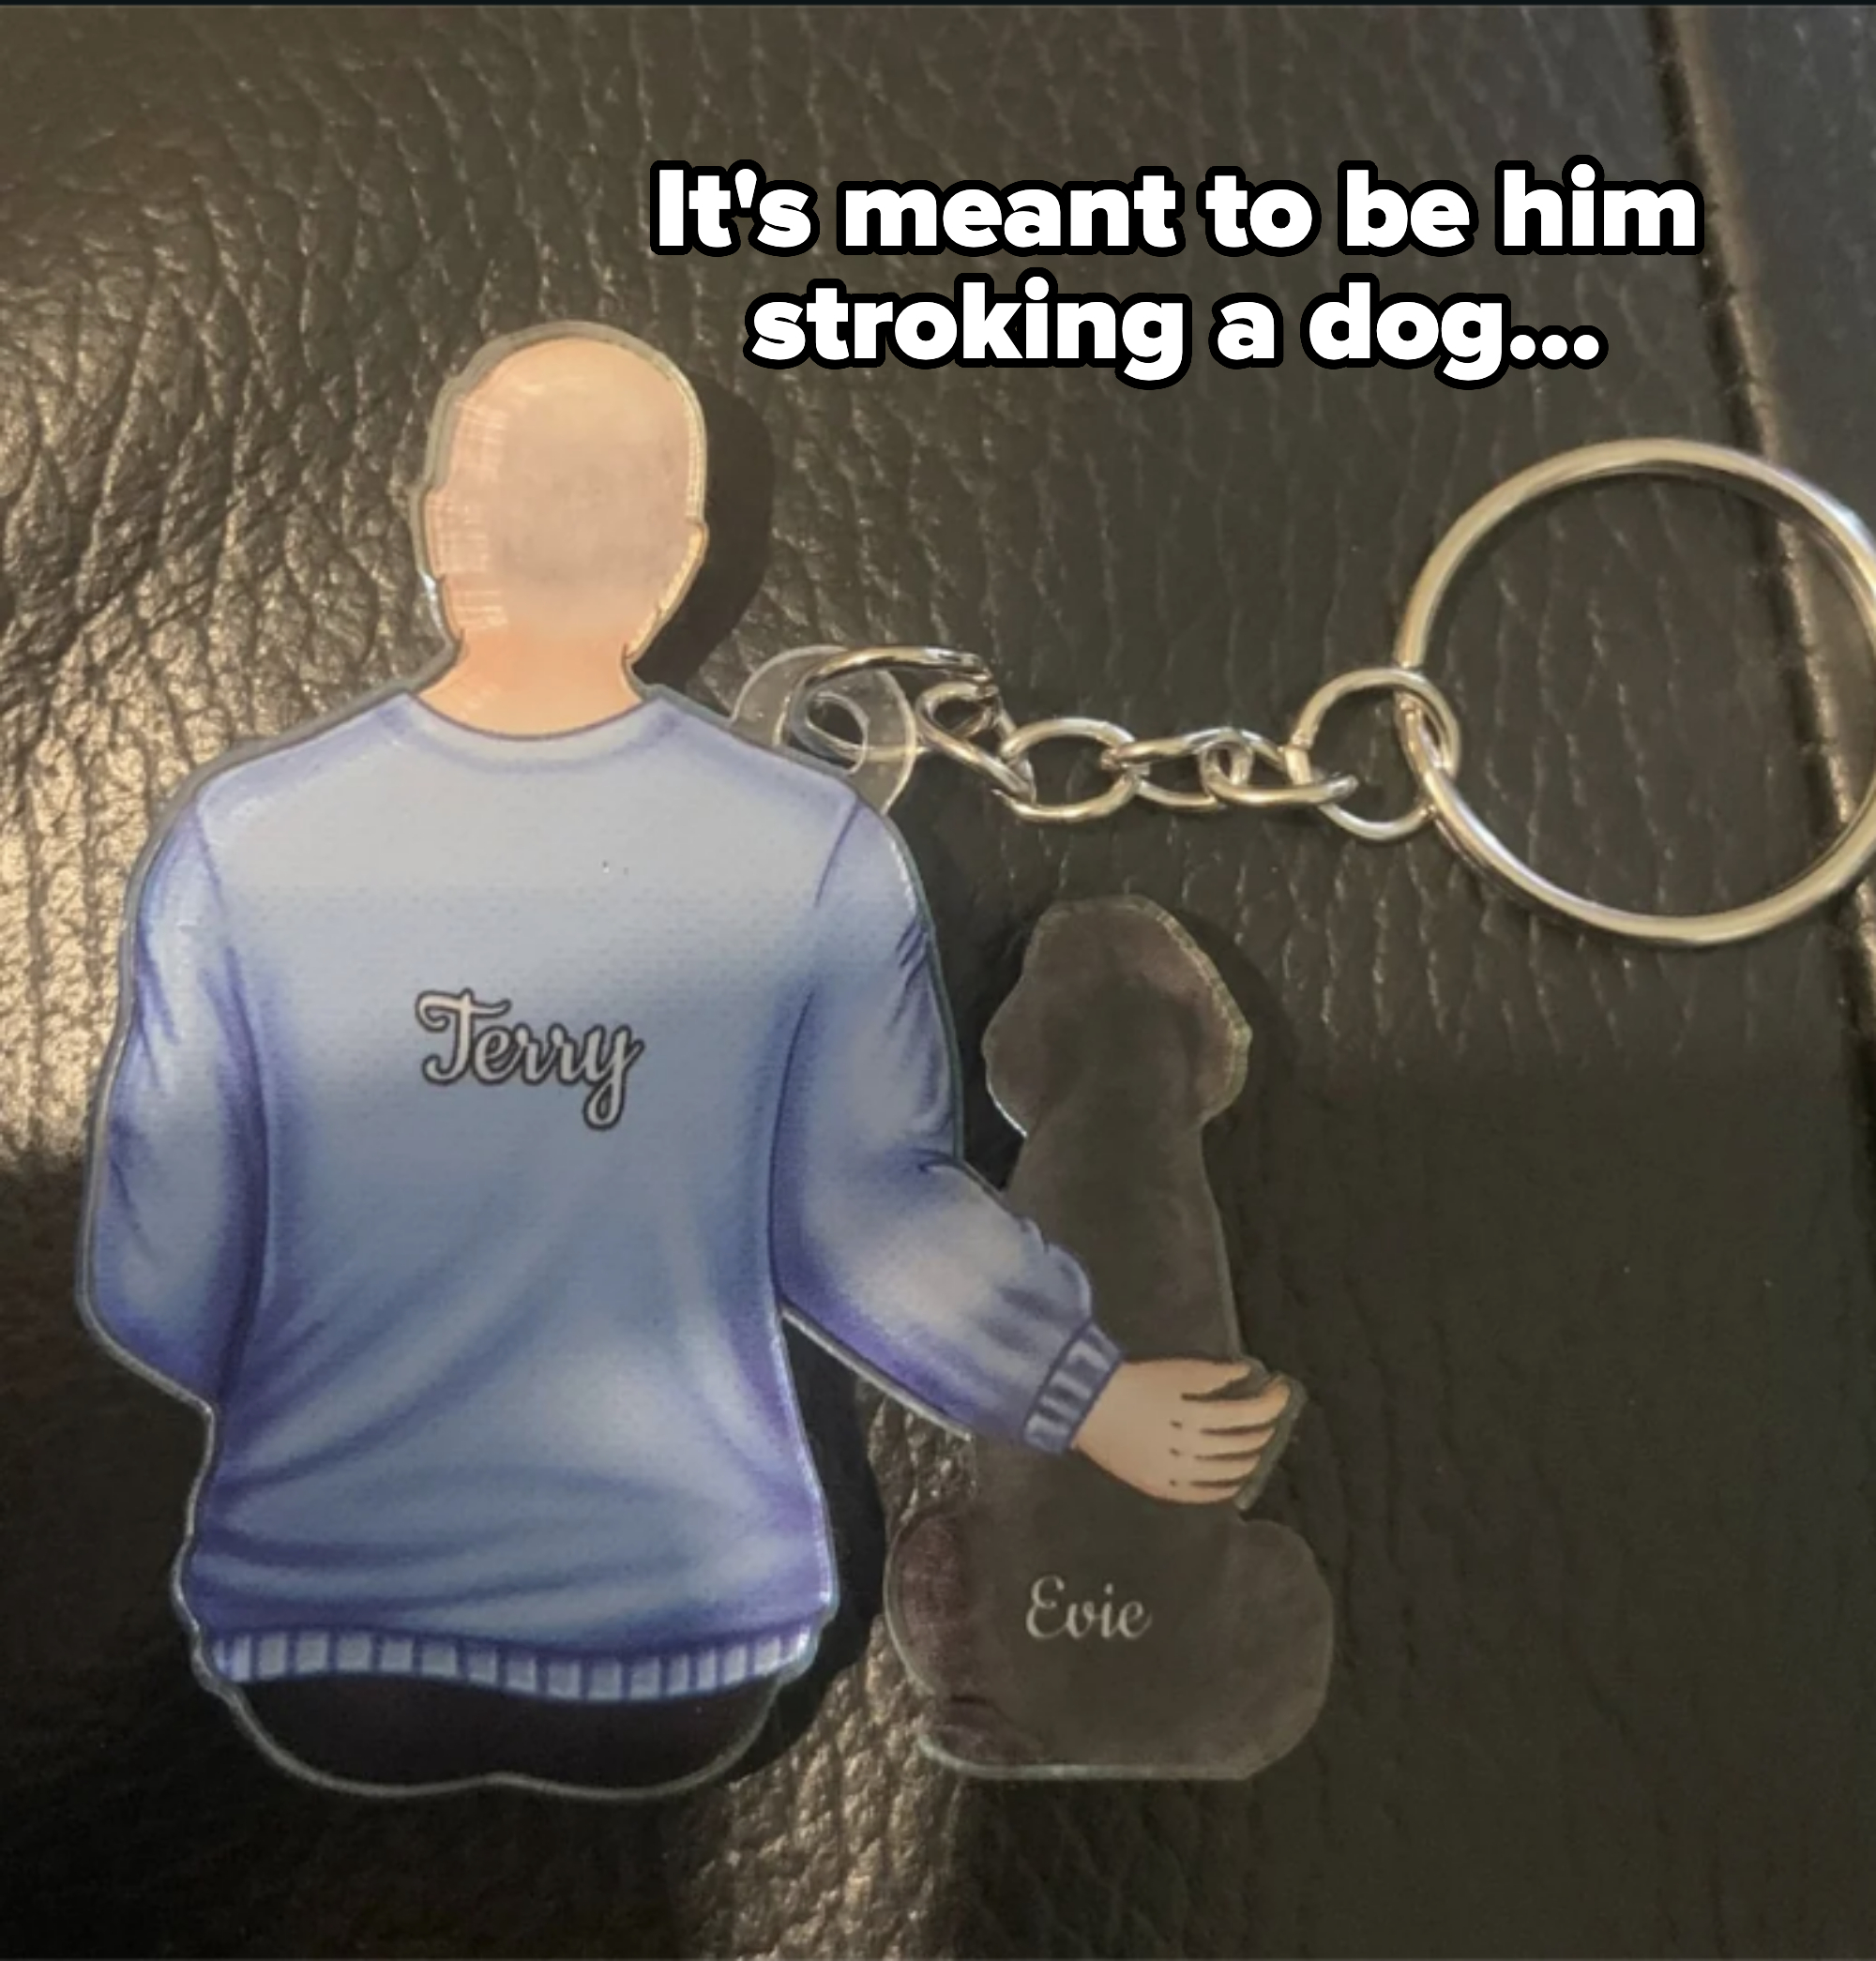 Cartoon figures of Terry and a dog named Evie are depicted on a keychain. Terry is shown from the back, hugging Evie